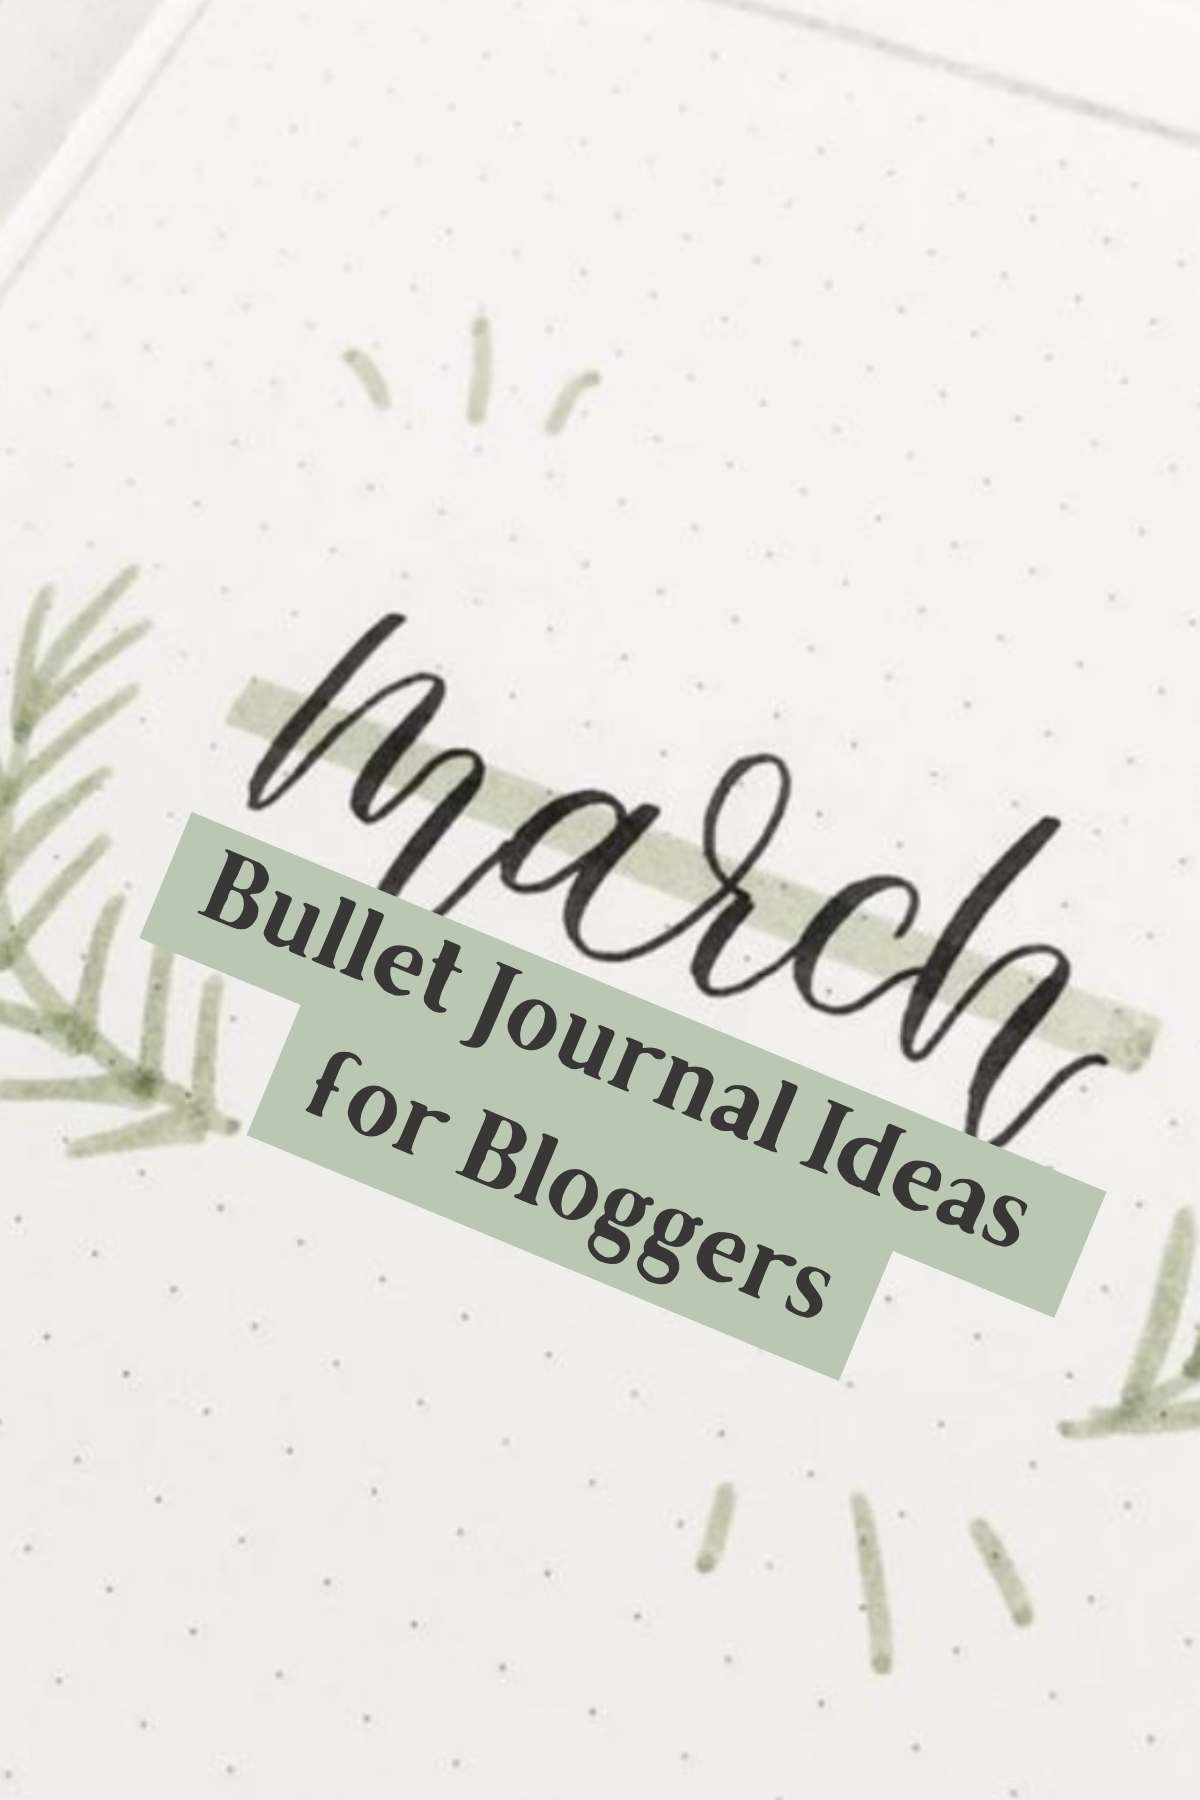 March Bullet Journal ideas for bloggers. Photo of march bullet journal